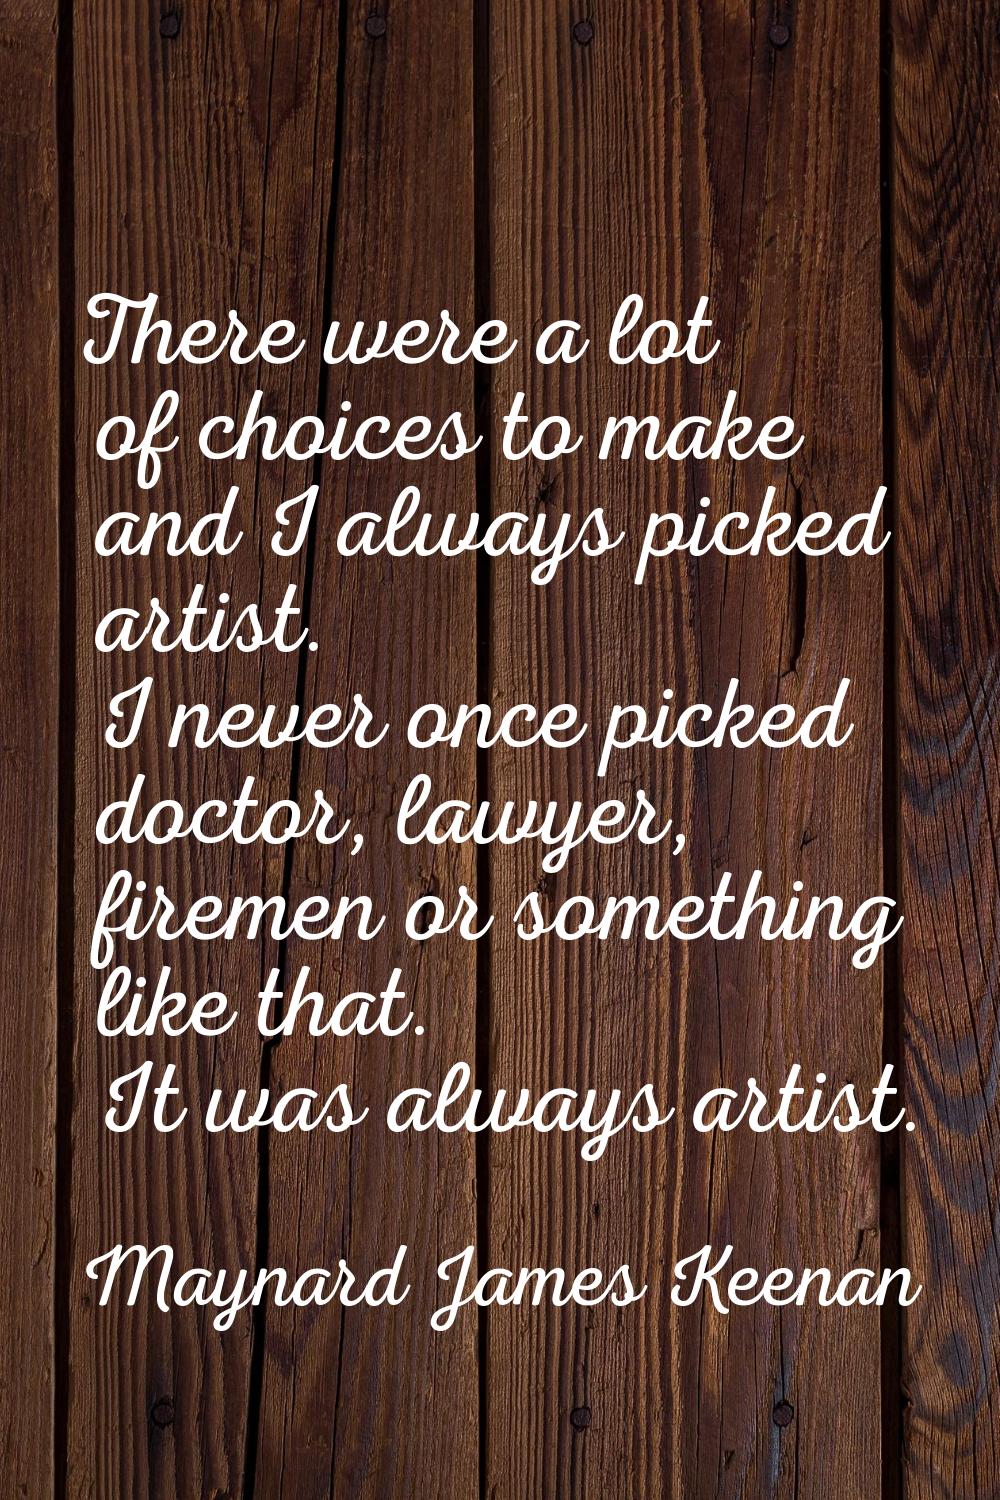 There were a lot of choices to make and I always picked artist. I never once picked doctor, lawyer,